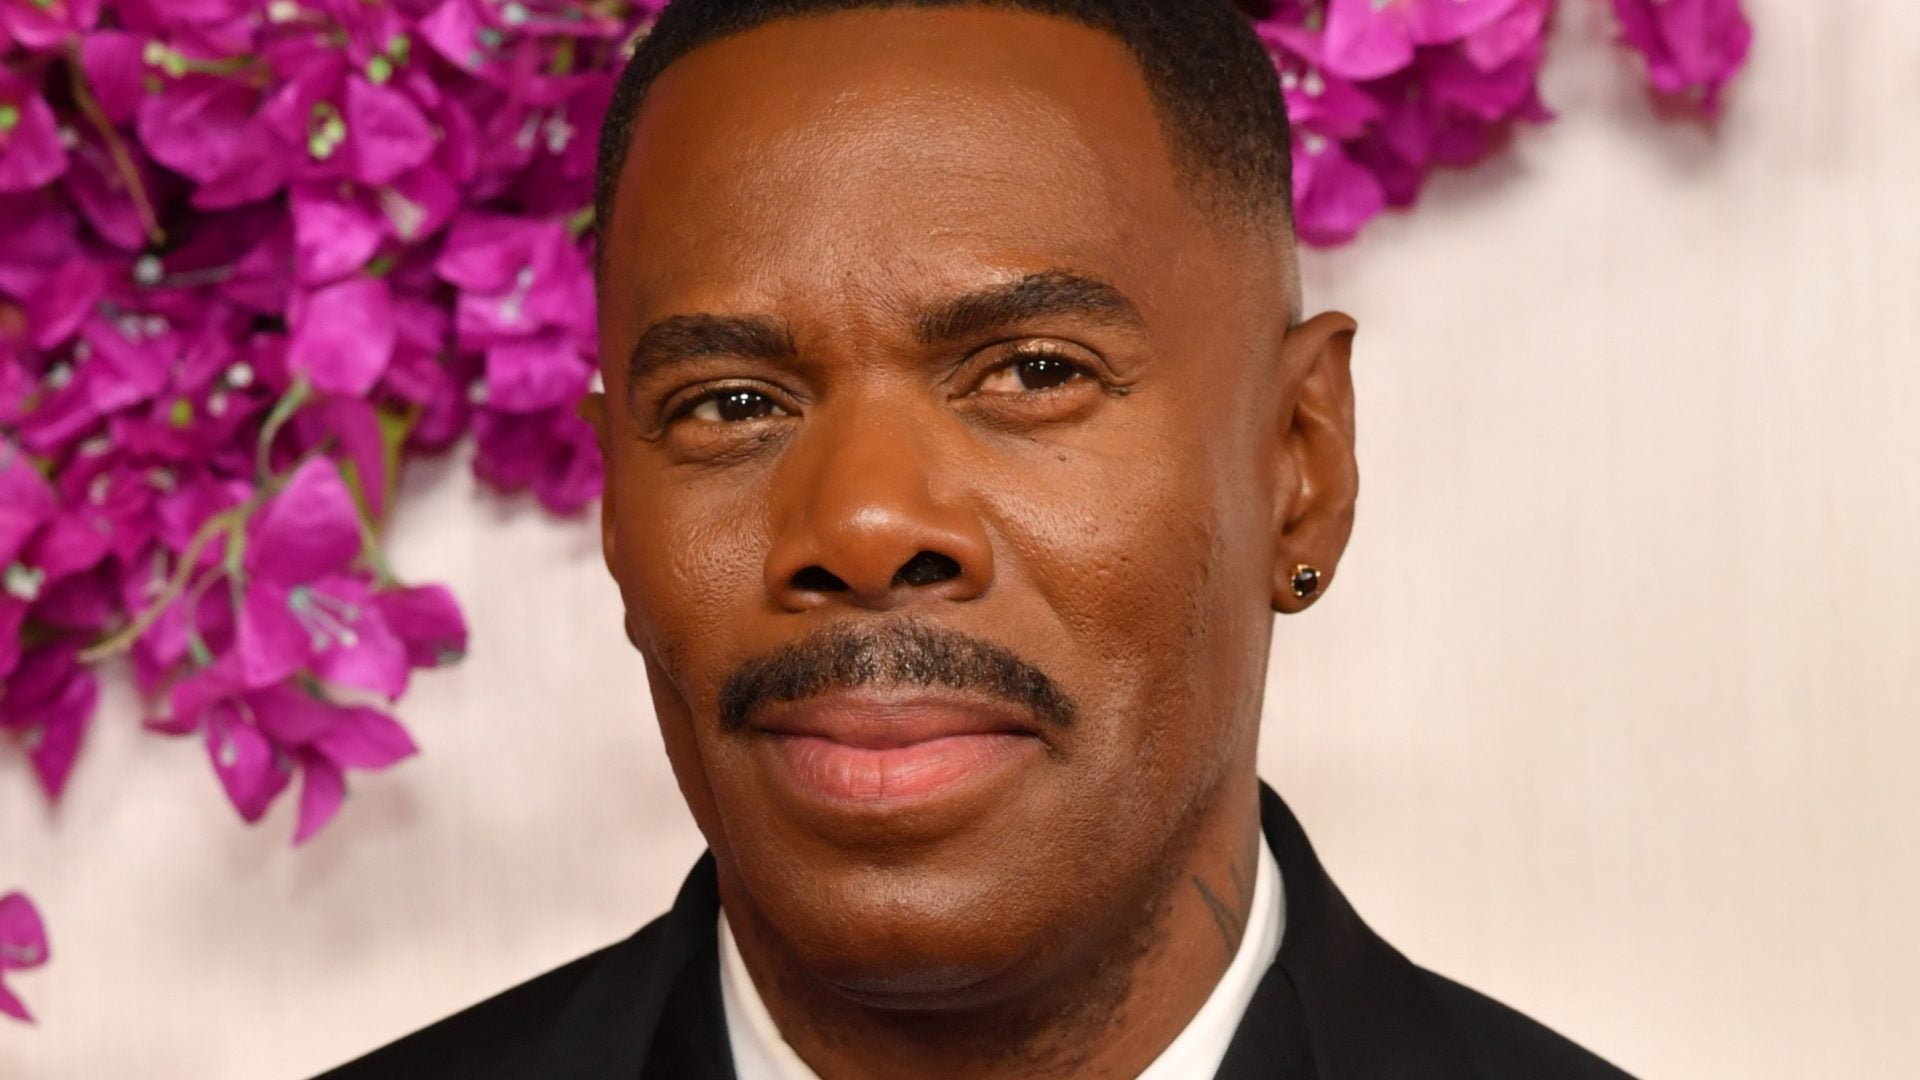 Get Ready With Colman Domingo for the 96th Oscars